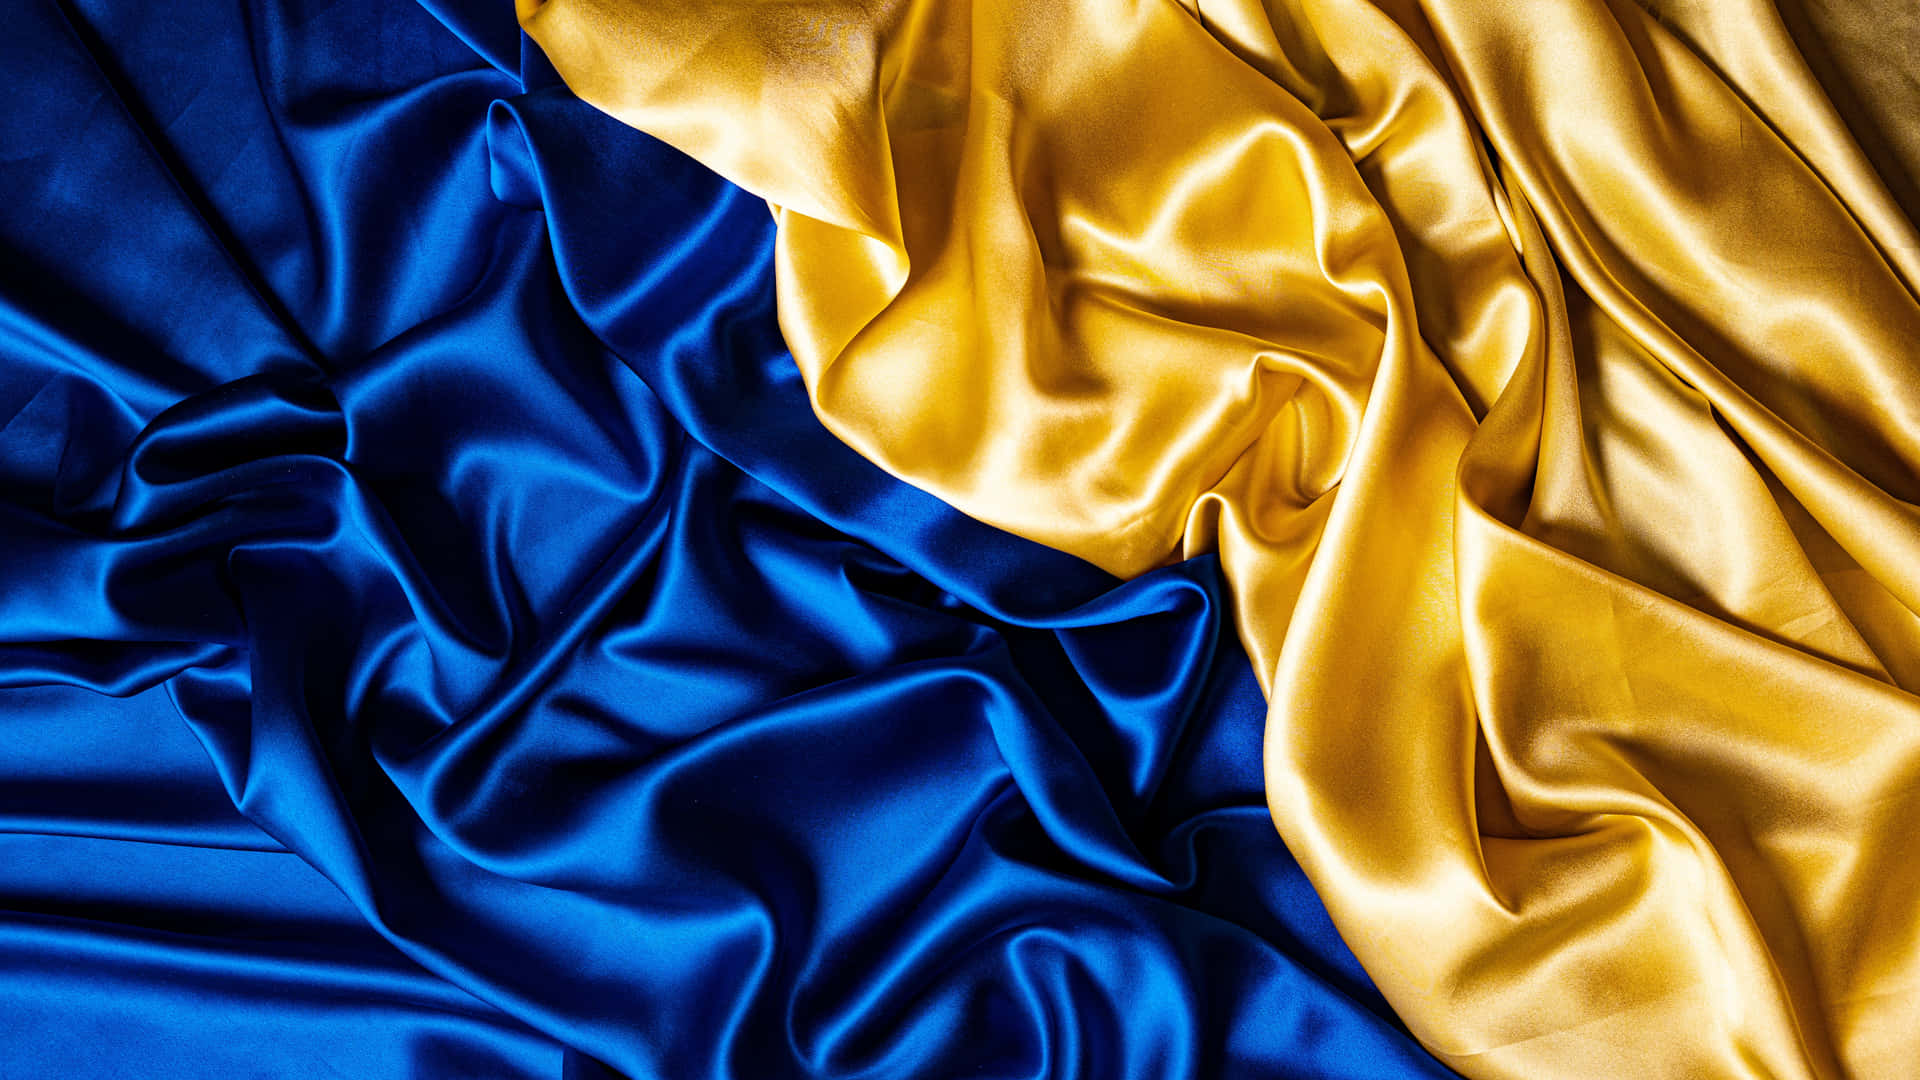 "A Touch of Glamour - The Blue and Gold Background"